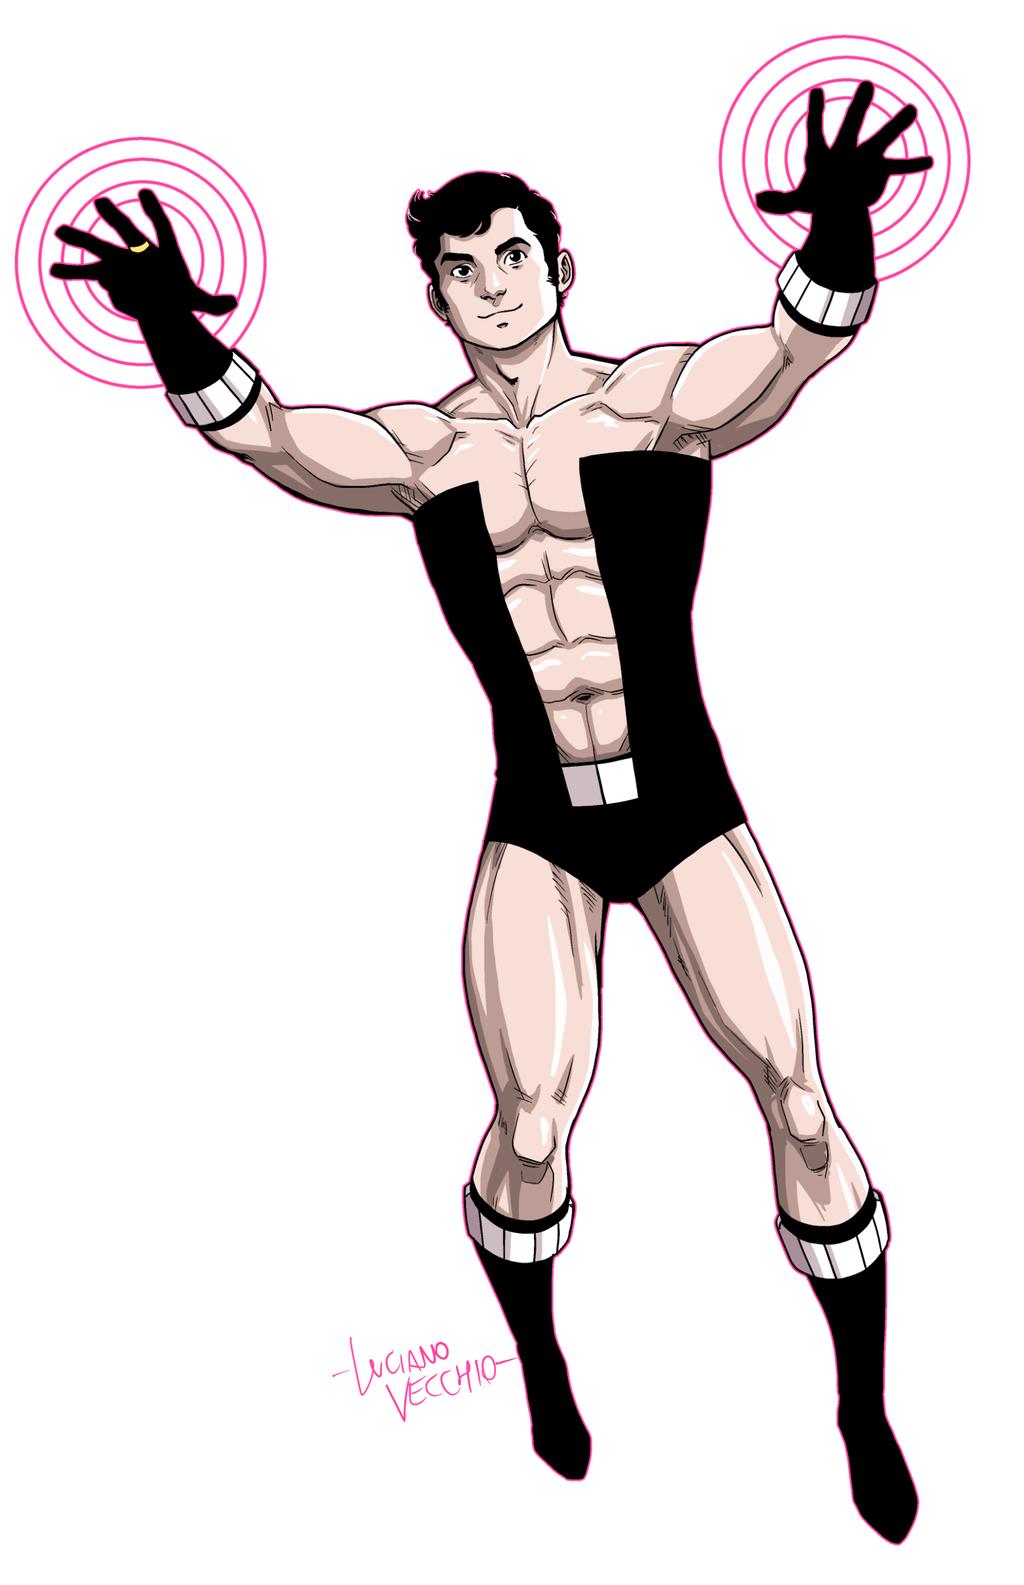 70s_cosmic_boy_by_lucianovecchio_ddl6l4c-fullview[1].jpg